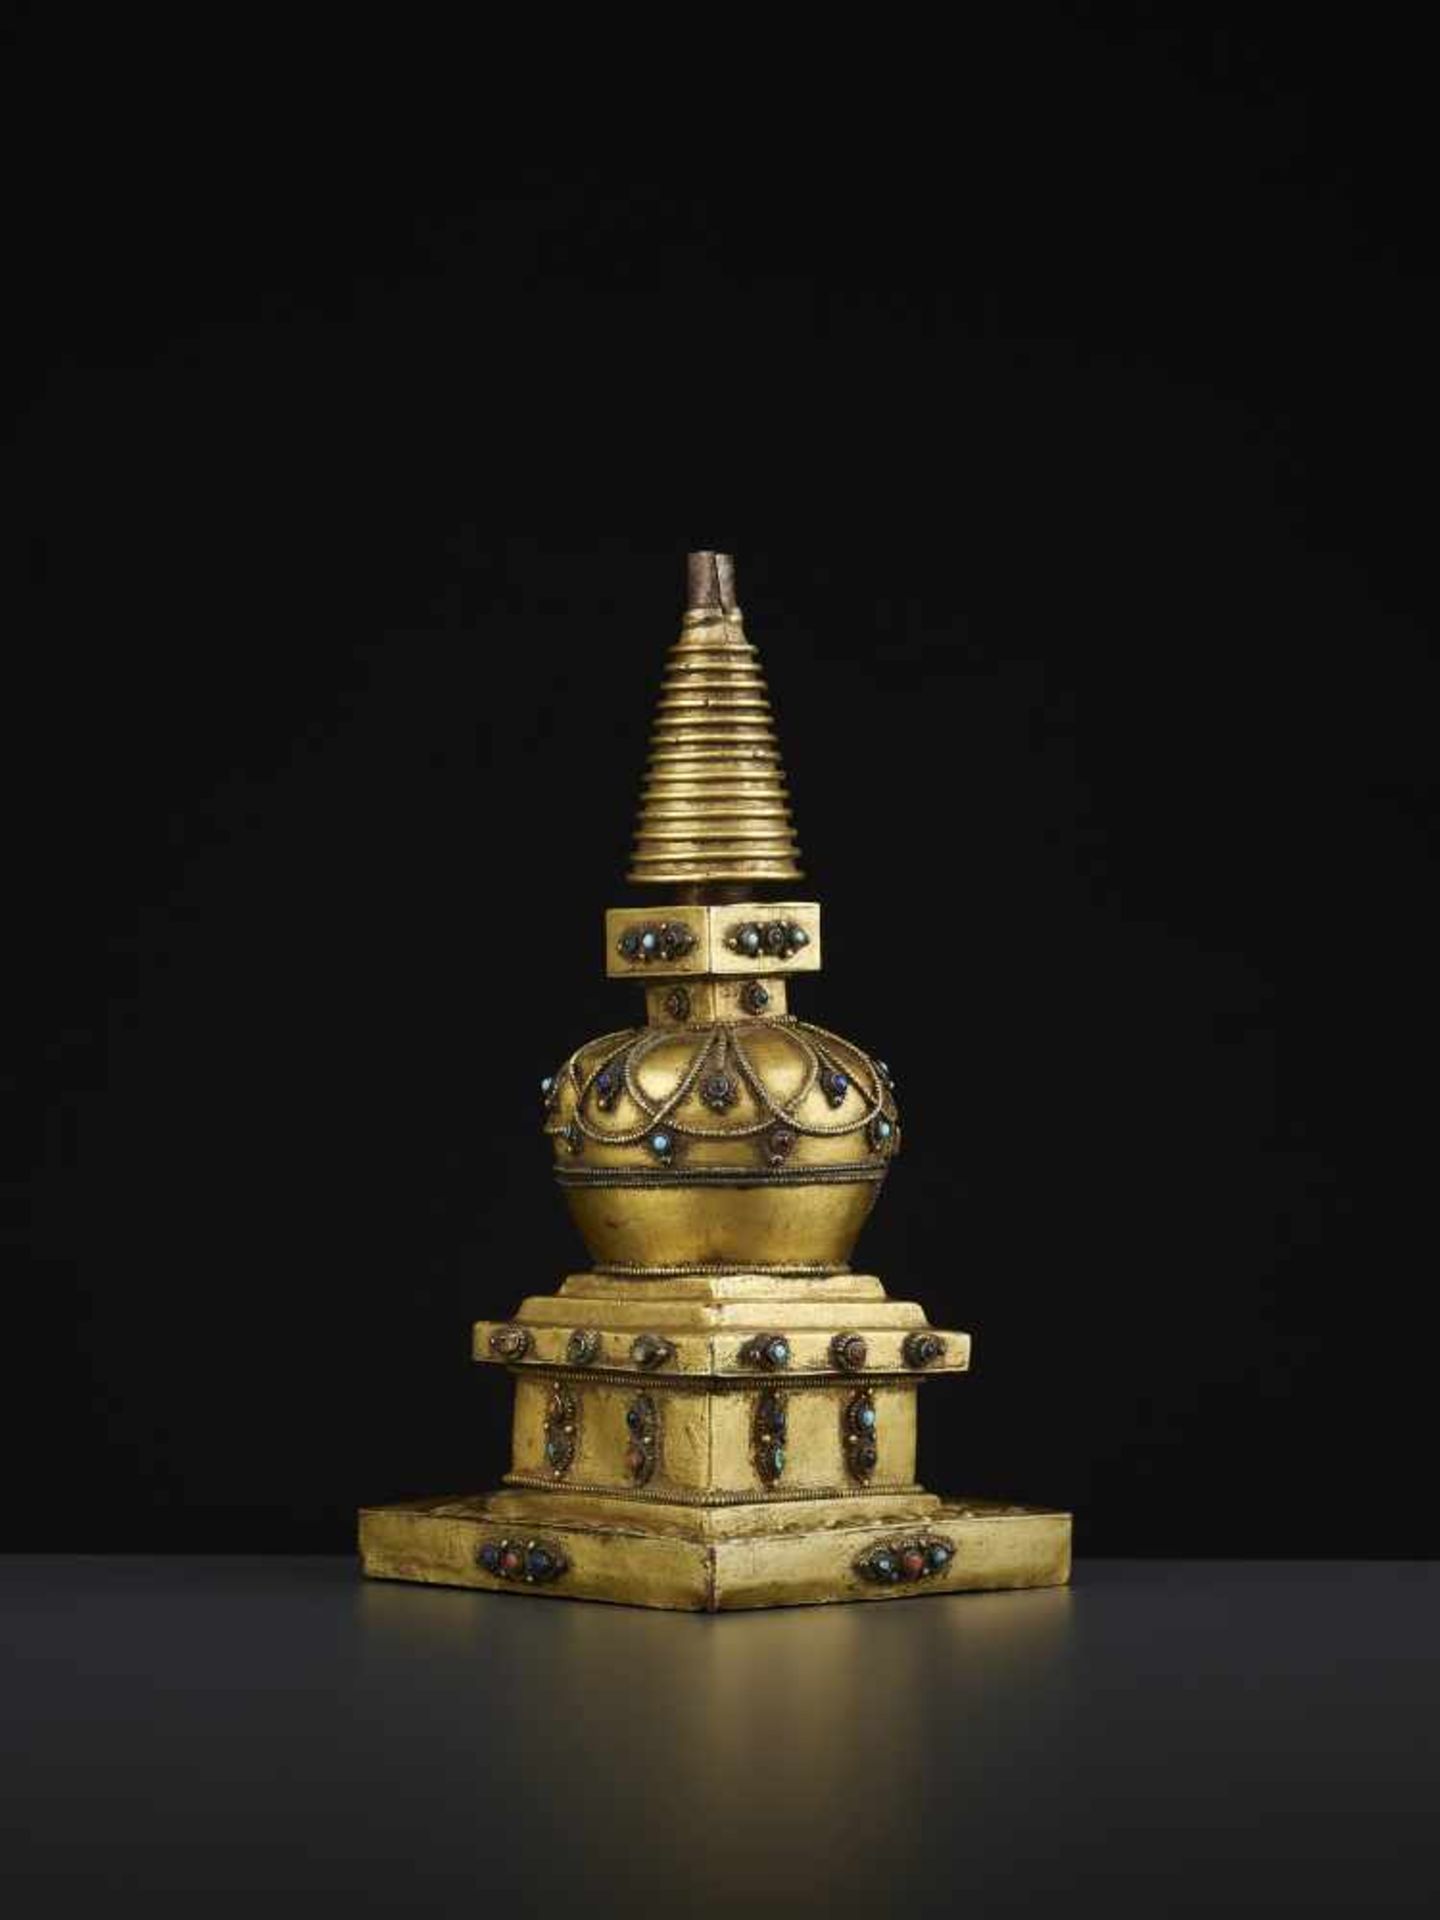 A REPOUSSE STUPA 18TH CENTURYTibet, 18TH to earlier 19TH century. A fire-gilt copper model of a - Image 7 of 11